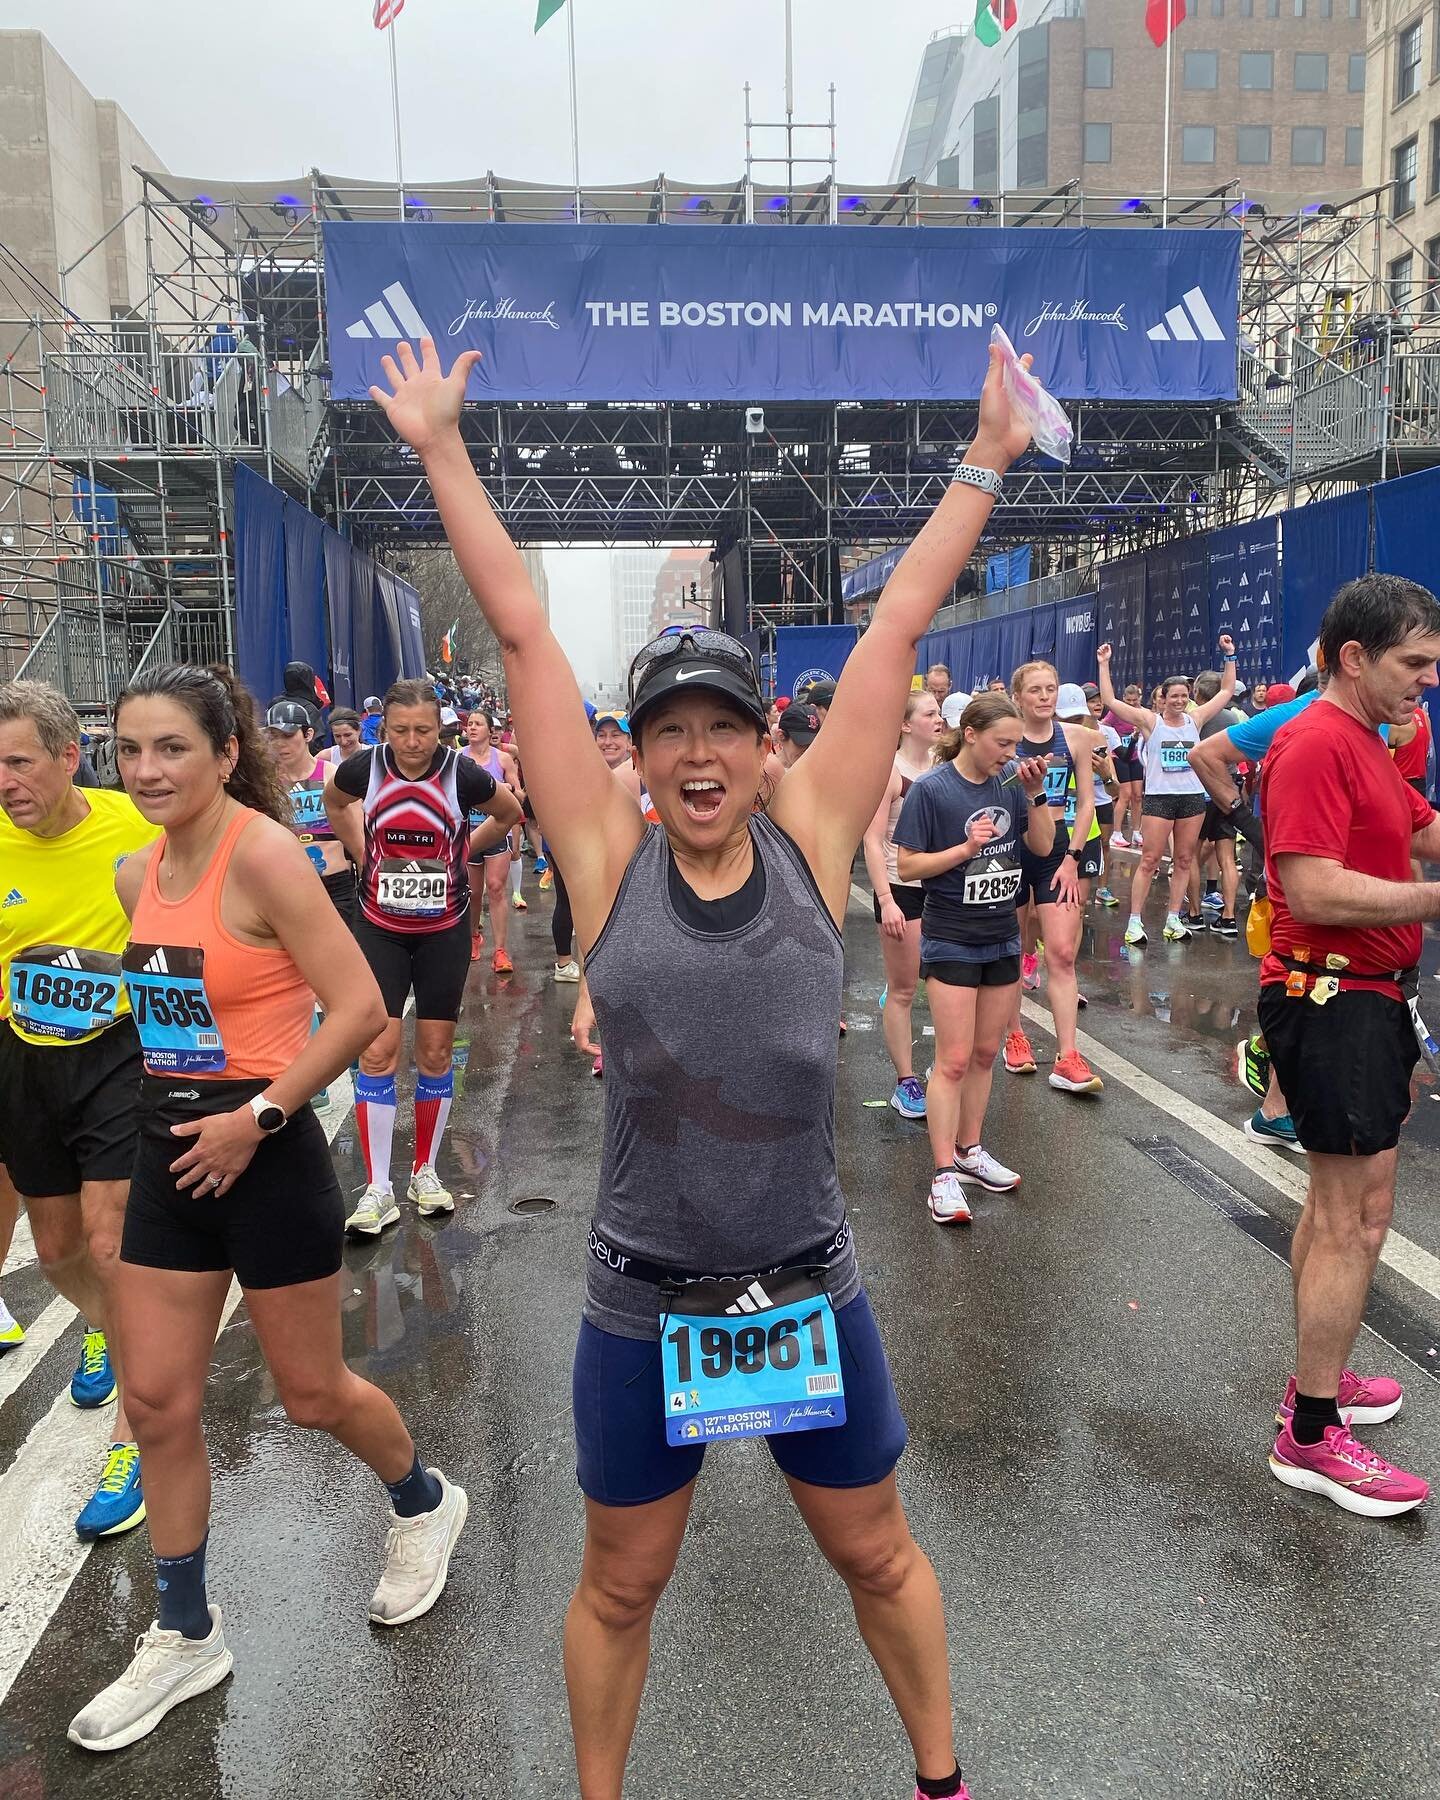 She does it with beauty and grace🏃🏻&zwj;♀️💨☺️

Sending a big shout out to one of our favorite Charites and friend, Rachel!

At the Boston Marathon this year Rachel finished strong at 3:37:30!! AND a 9 minute PR!!! What an accomplishment-especially